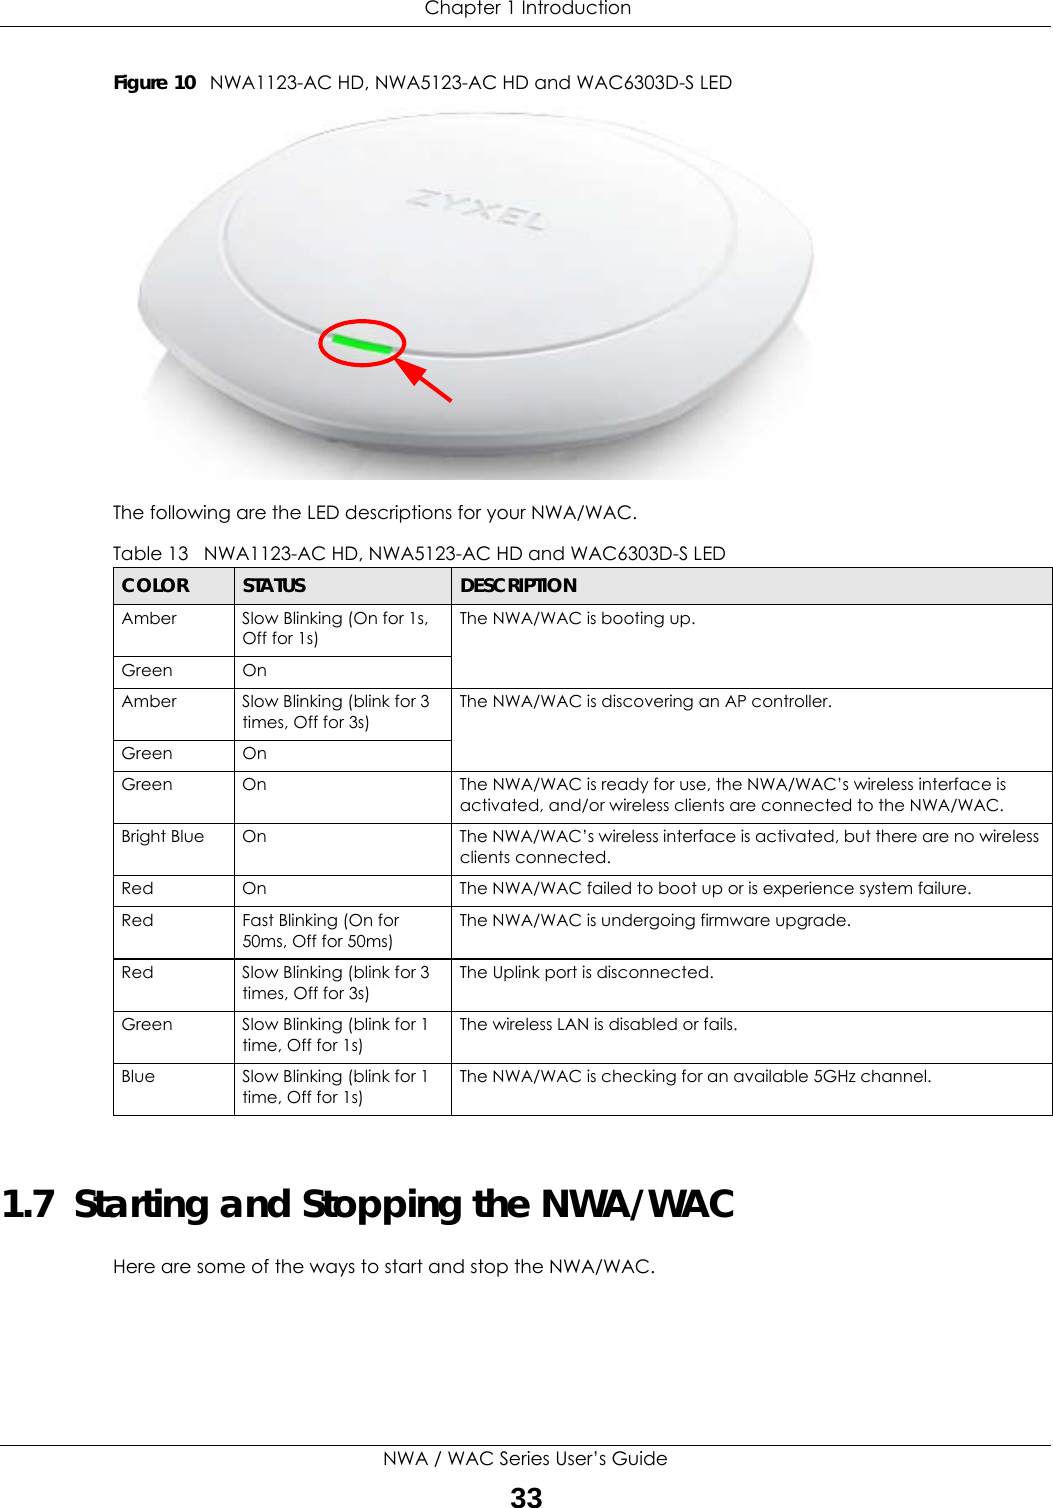  Chapter 1 IntroductionNWA / WAC Series User’s Guide33Figure 10   NWA1123-AC HD, NWA5123-AC HD and WAC6303D-S LED  The following are the LED descriptions for your NWA/WAC. 1.7  Starting and Stopping the NWA/WACHere are some of the ways to start and stop the NWA/WAC.Table 13   NWA1123-AC HD, NWA5123-AC HD and WAC6303D-S LEDCOLOR STATUS DESCRIPTIONAmber Slow Blinking (On for 1s, Off for 1s)The NWA/WAC is booting up.Green On Amber Slow Blinking (blink for 3 times, Off for 3s)The NWA/WAC is discovering an AP controller.Green OnGreen On The NWA/WAC is ready for use, the NWA/WAC’s wireless interface is activated, and/or wireless clients are connected to the NWA/WAC.Bright Blue On The NWA/WAC’s wireless interface is activated, but there are no wireless clients connected.Red On The NWA/WAC failed to boot up or is experience system failure.Red Fast Blinking (On for 50ms, Off for 50ms)The NWA/WAC is undergoing firmware upgrade.Red Slow Blinking (blink for 3 times, Off for 3s)The Uplink port is disconnected.Green Slow Blinking (blink for 1 time, Off for 1s)The wireless LAN is disabled or fails.Blue Slow Blinking (blink for 1 time, Off for 1s)The NWA/WAC is checking for an available 5GHz channel.